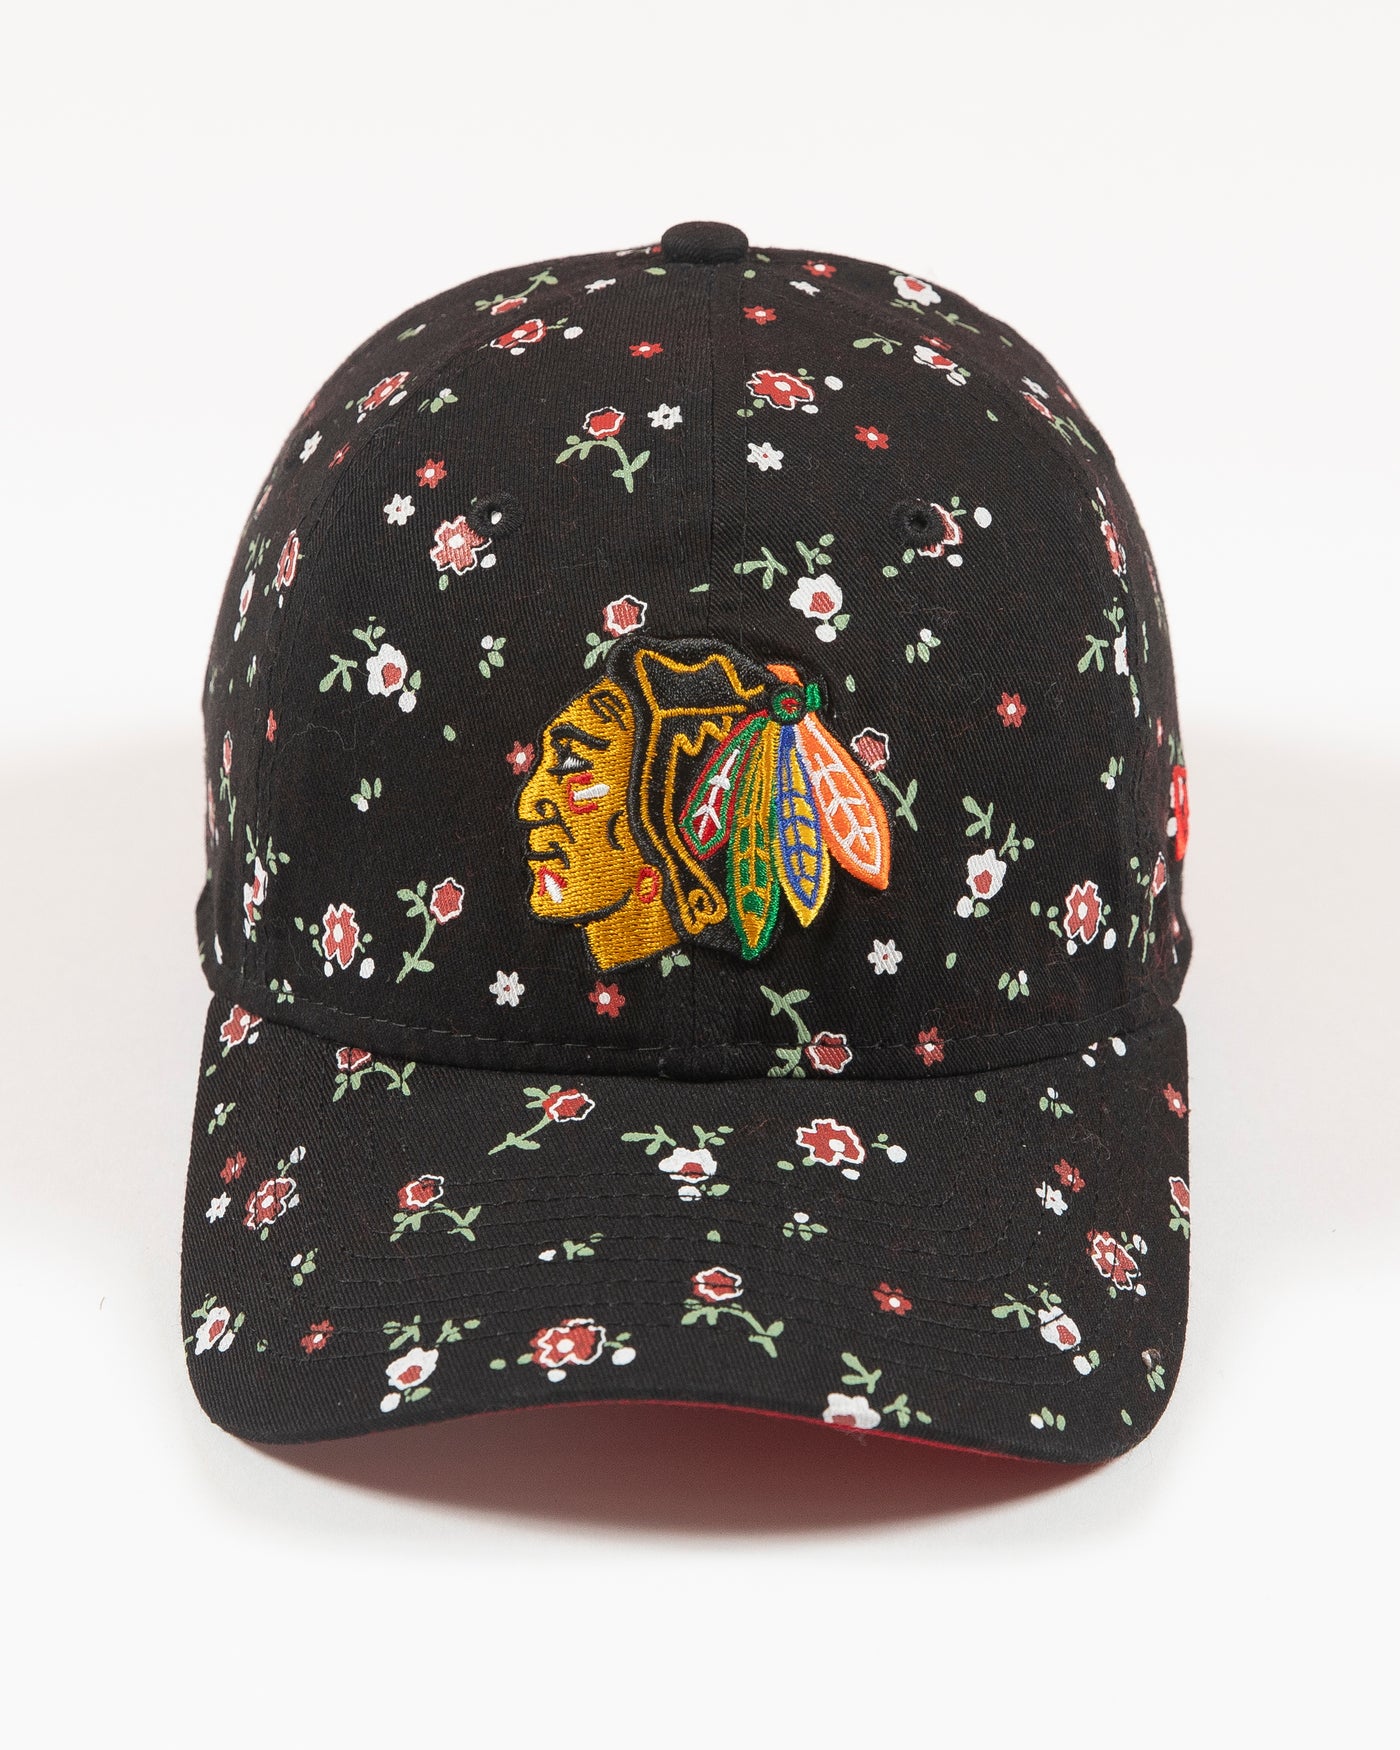 Black floral print New Era women's cap with Chicago Blackhawks primary logo embroidered on front - front lay flat